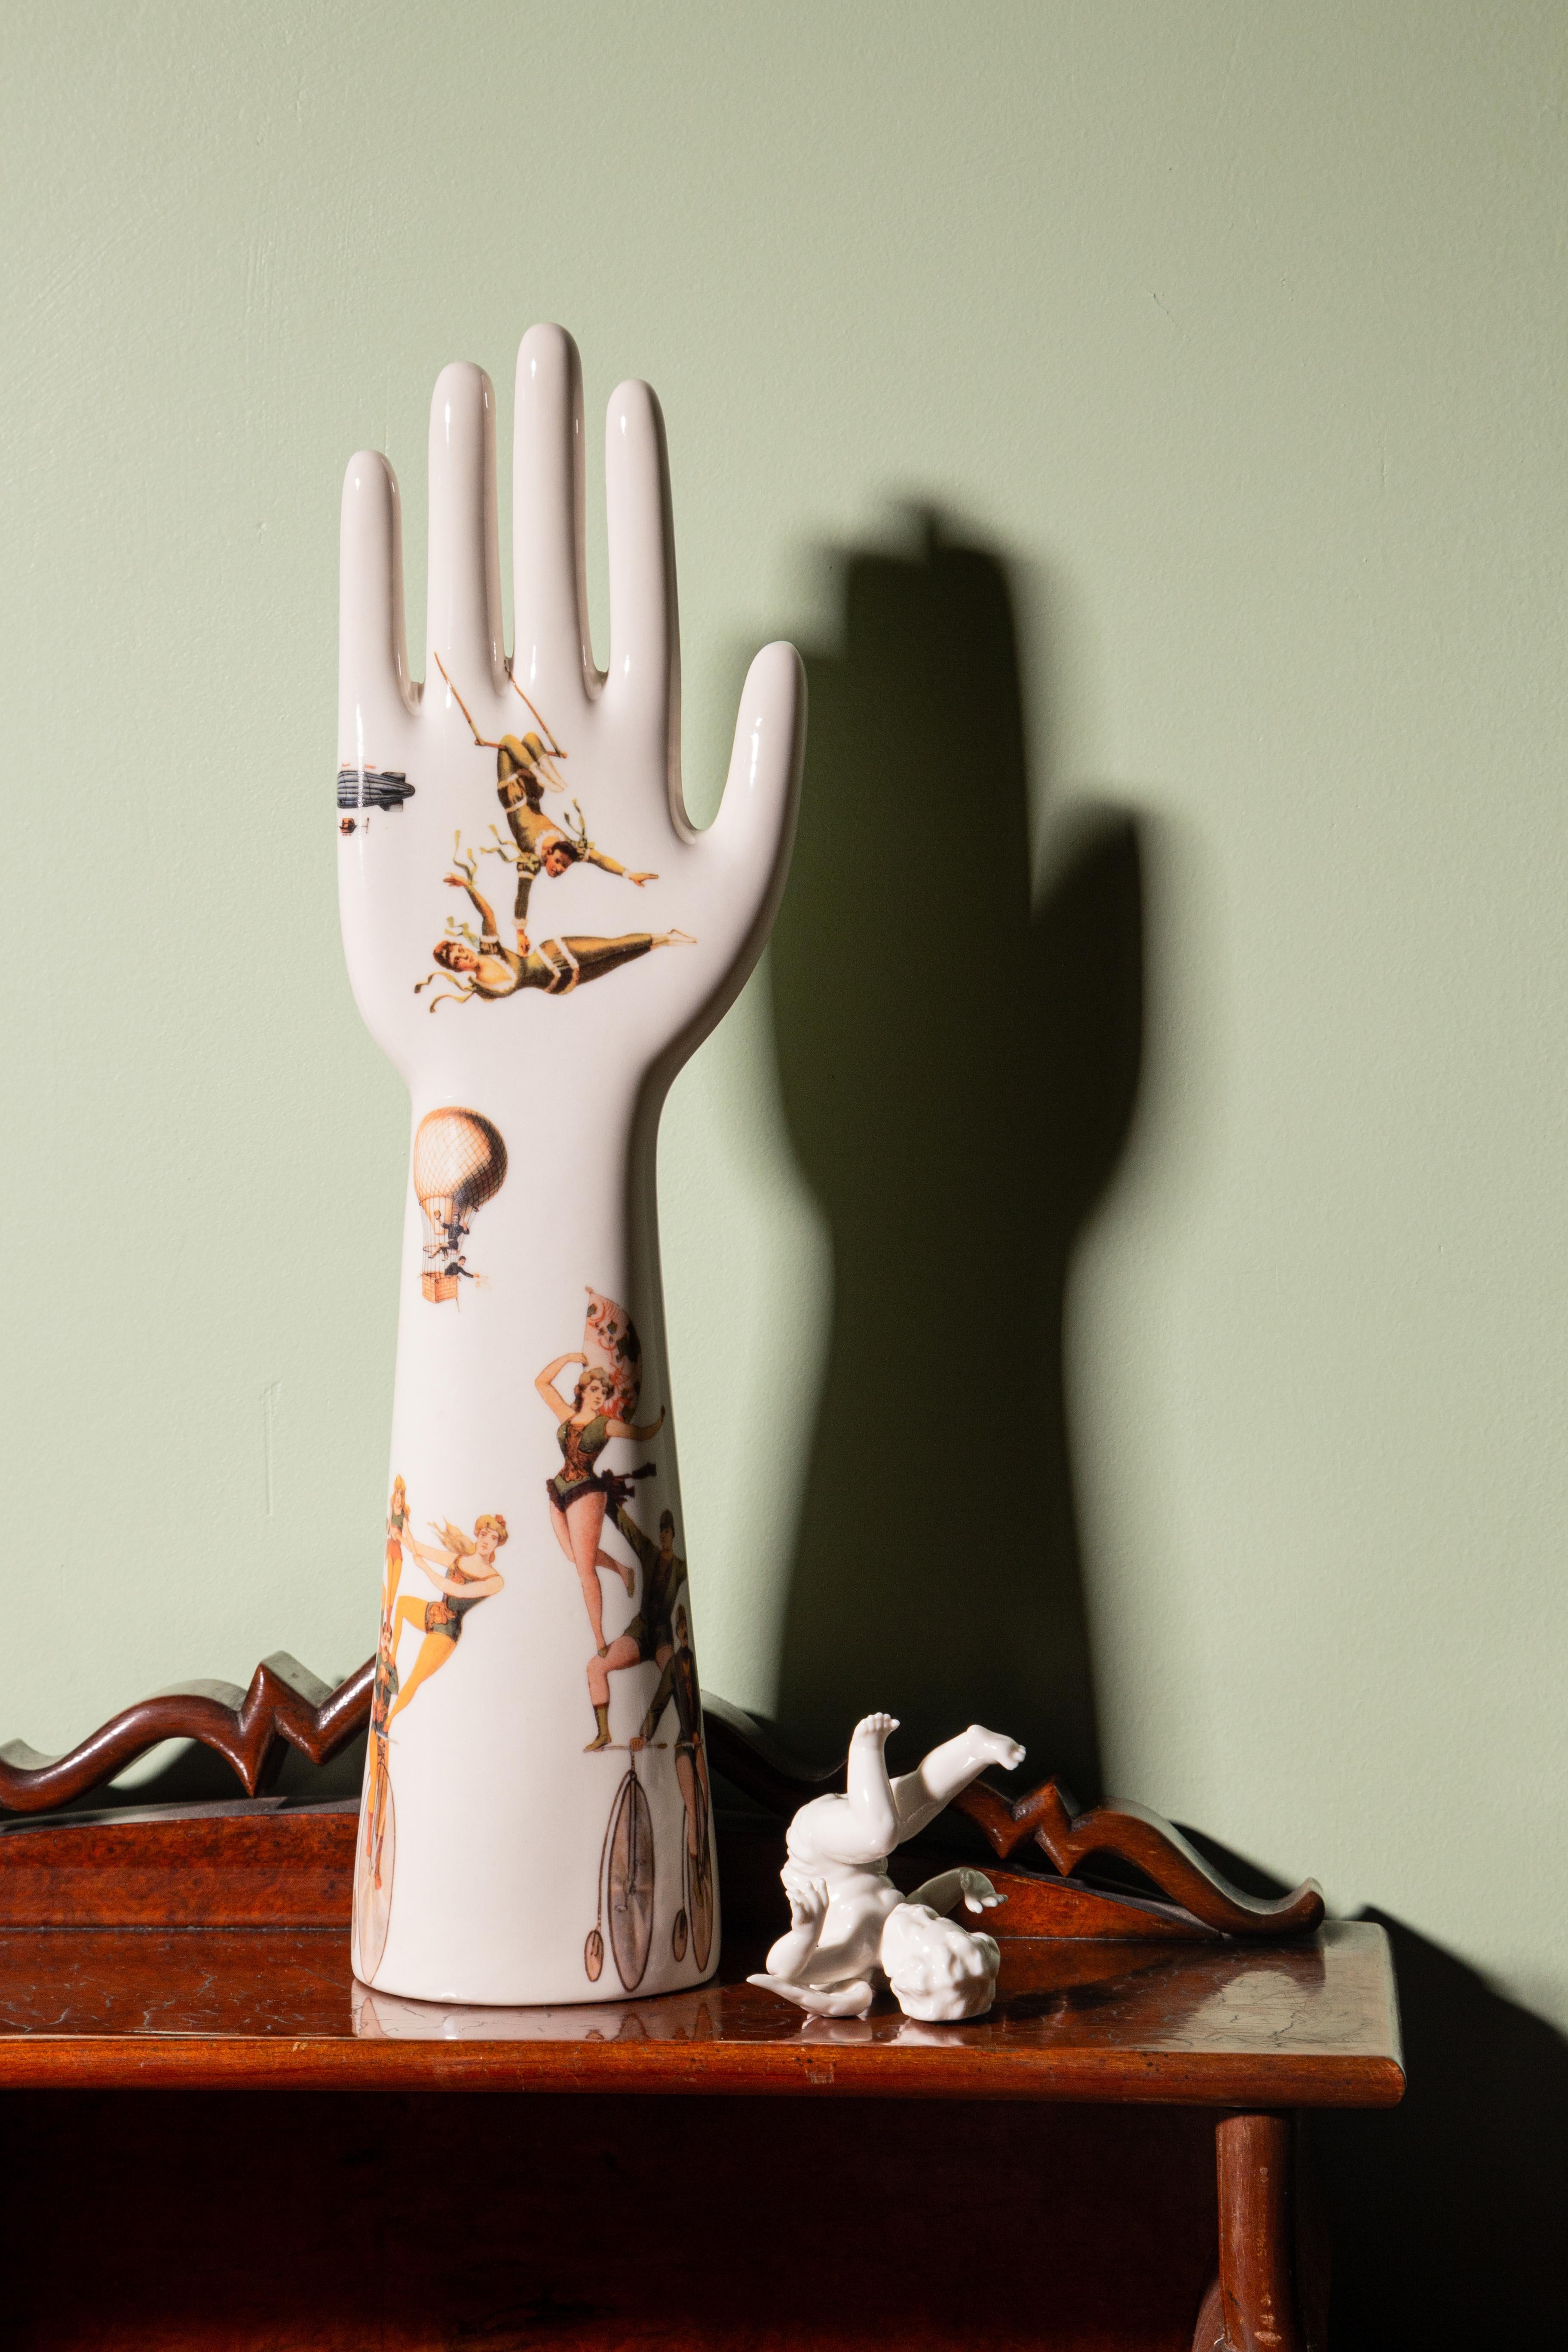 Anatomica, Porcelain Hand with Circus Artists Decoration by Vito Nesta For Sale 2